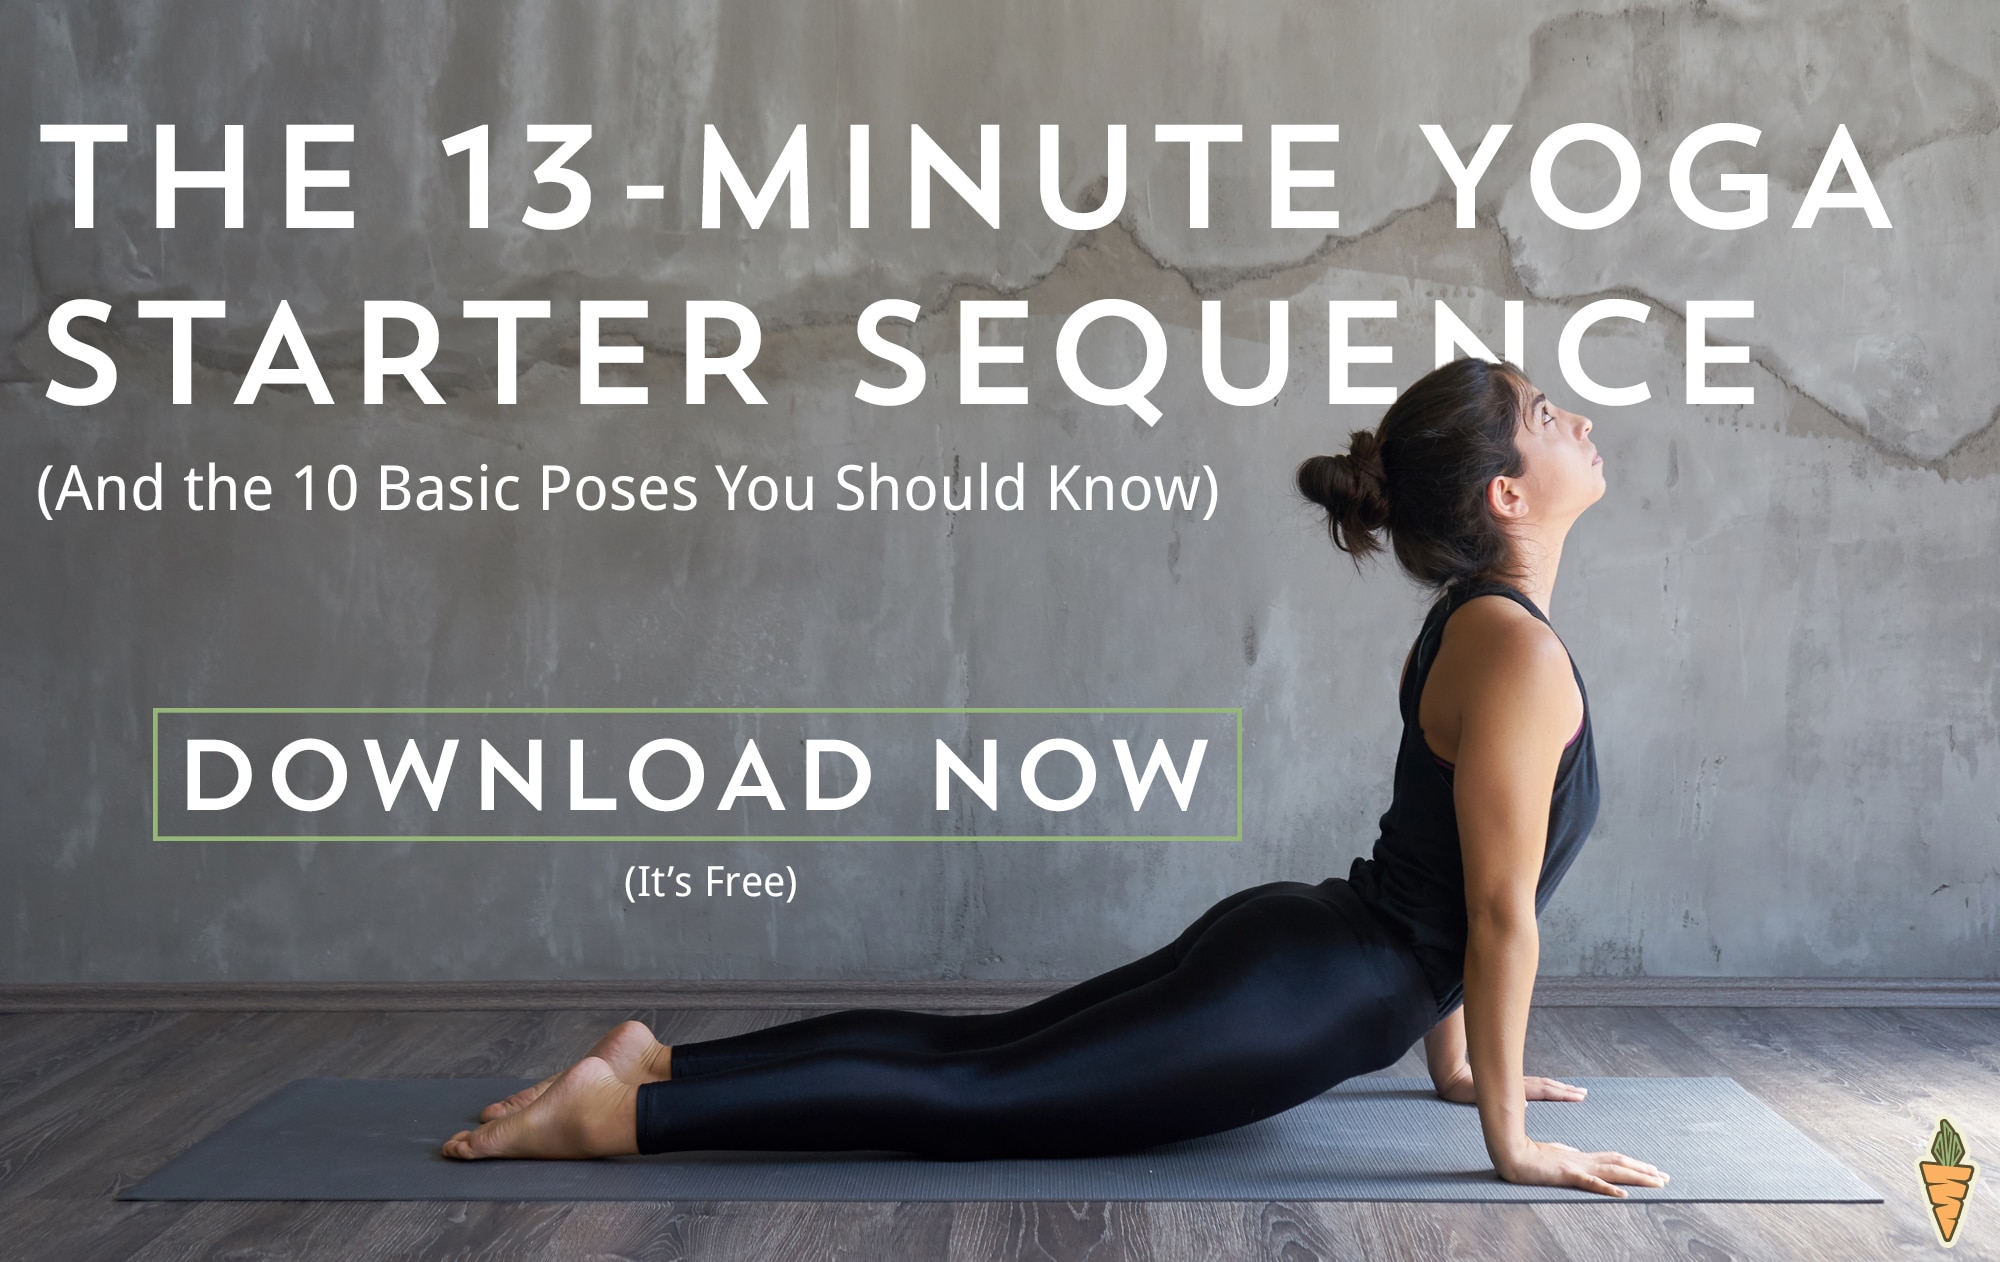 10 Essential Yoga Poses to Know Before Your First Class